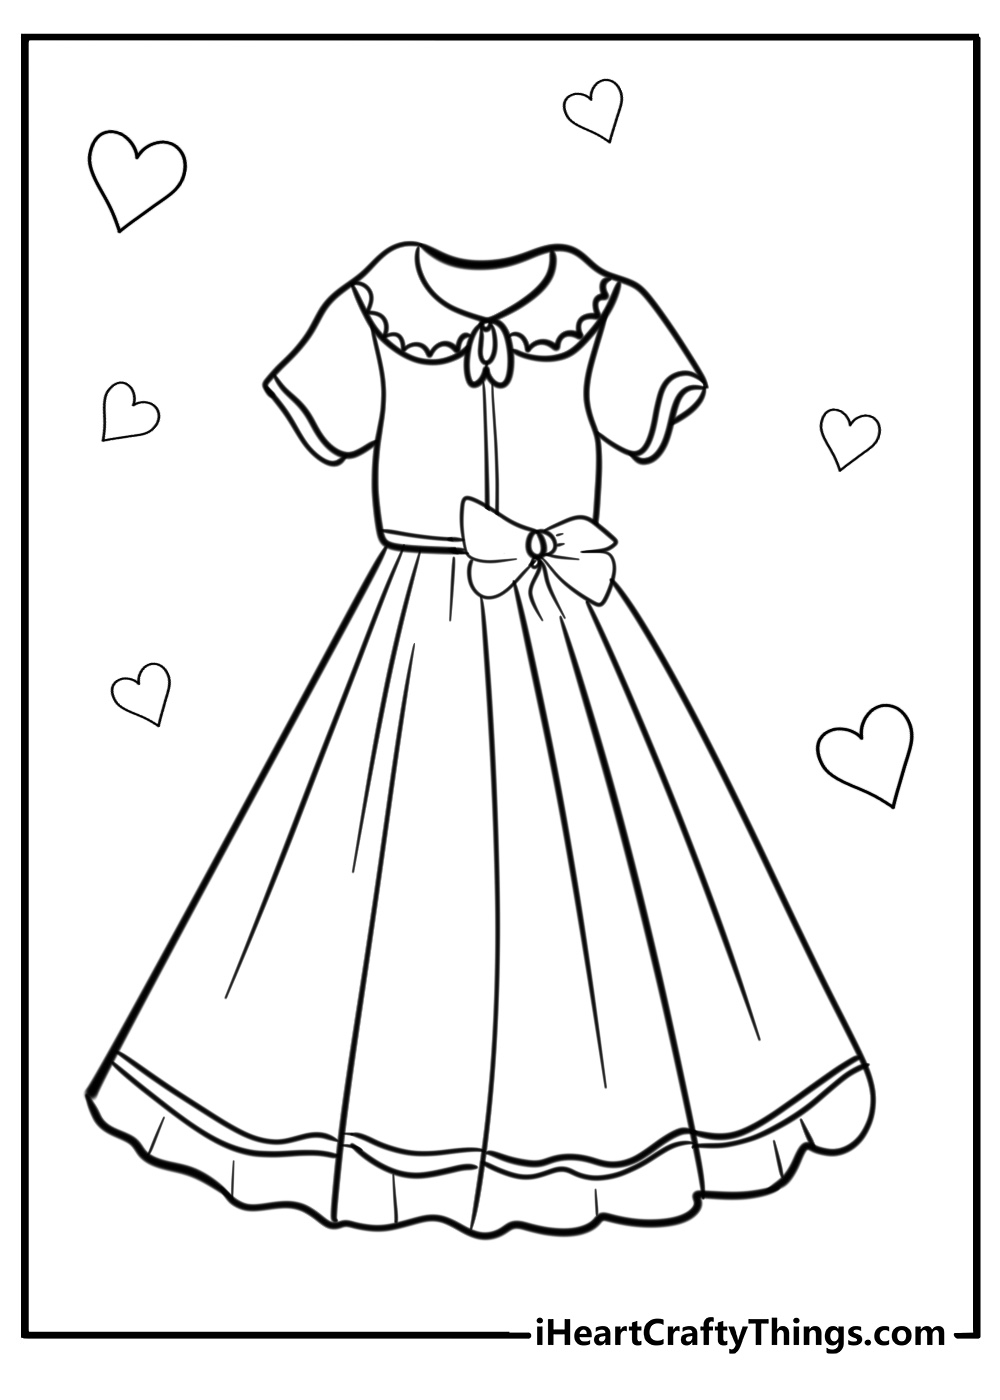 Cute dress coloring page with bow at the waist